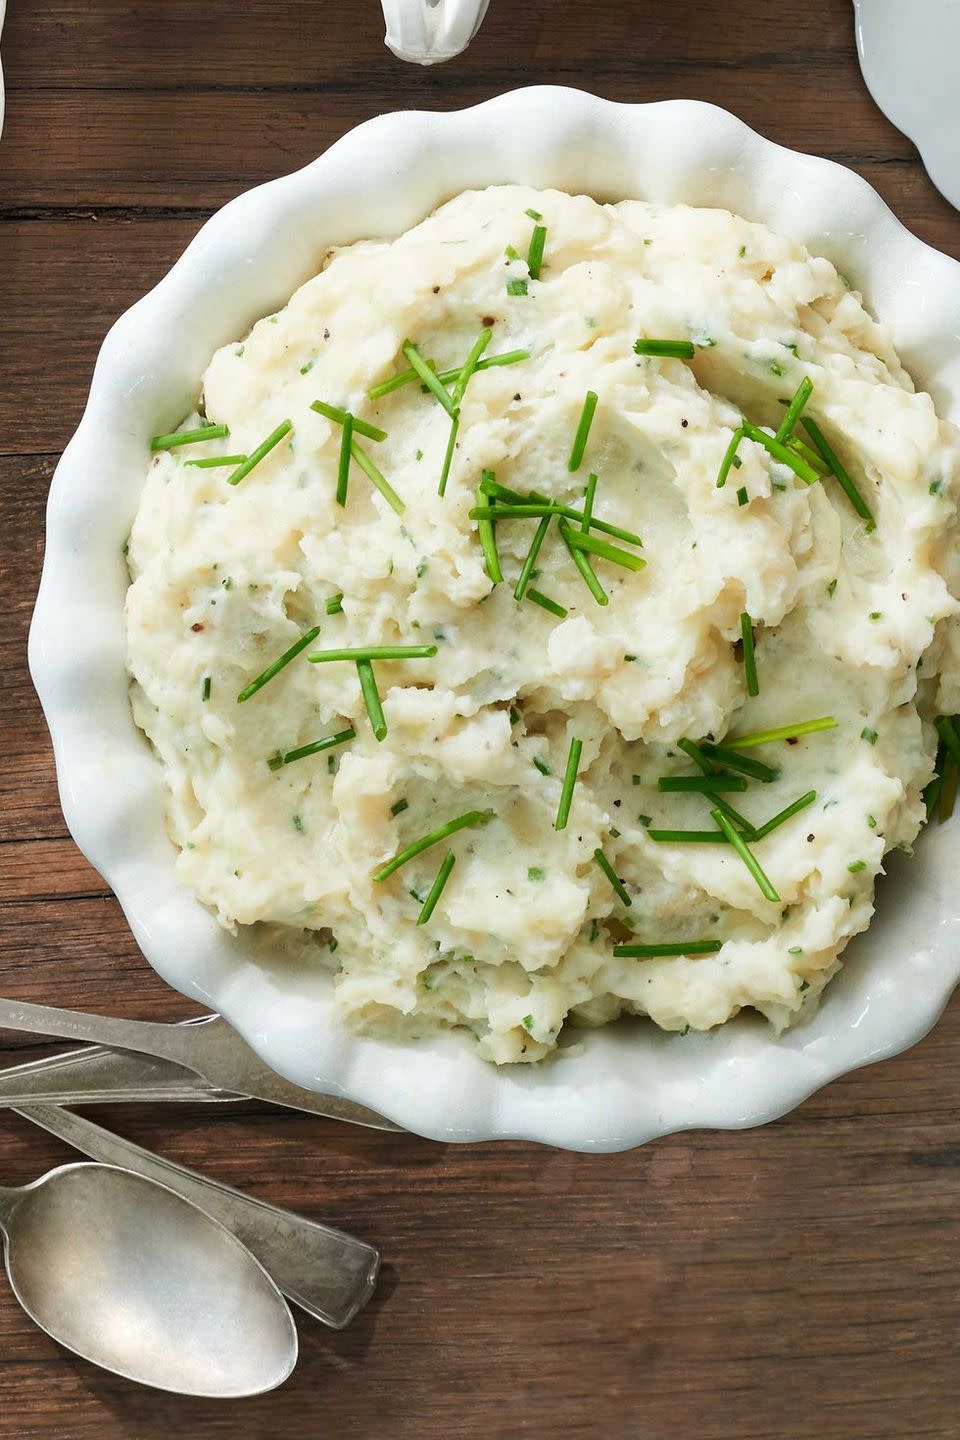 4) Slow-Cooker Mashed Potatoes